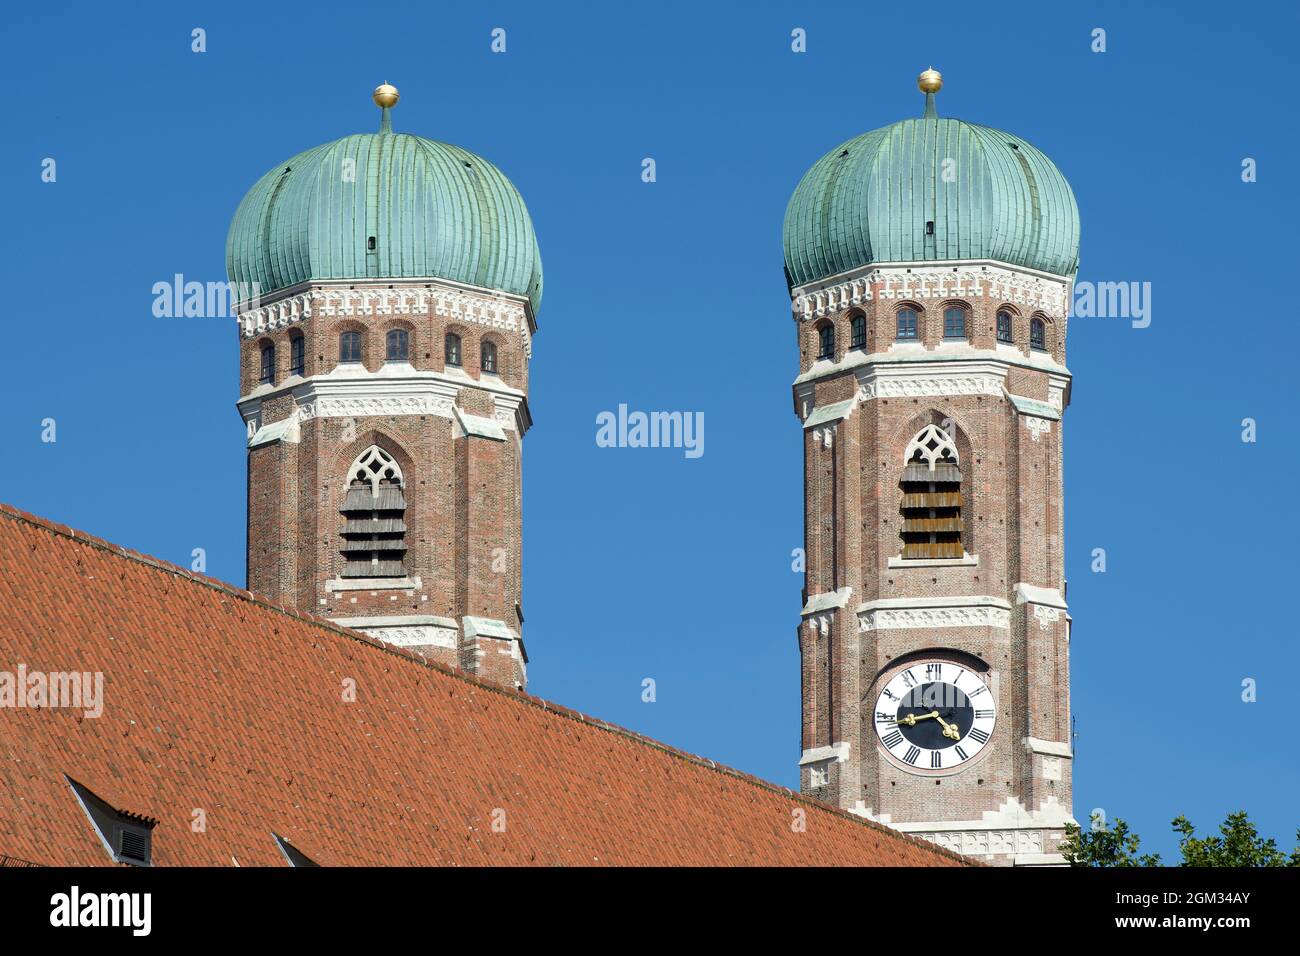 Church of Our Lady in the old town of Munich - Germany. Stock Photo